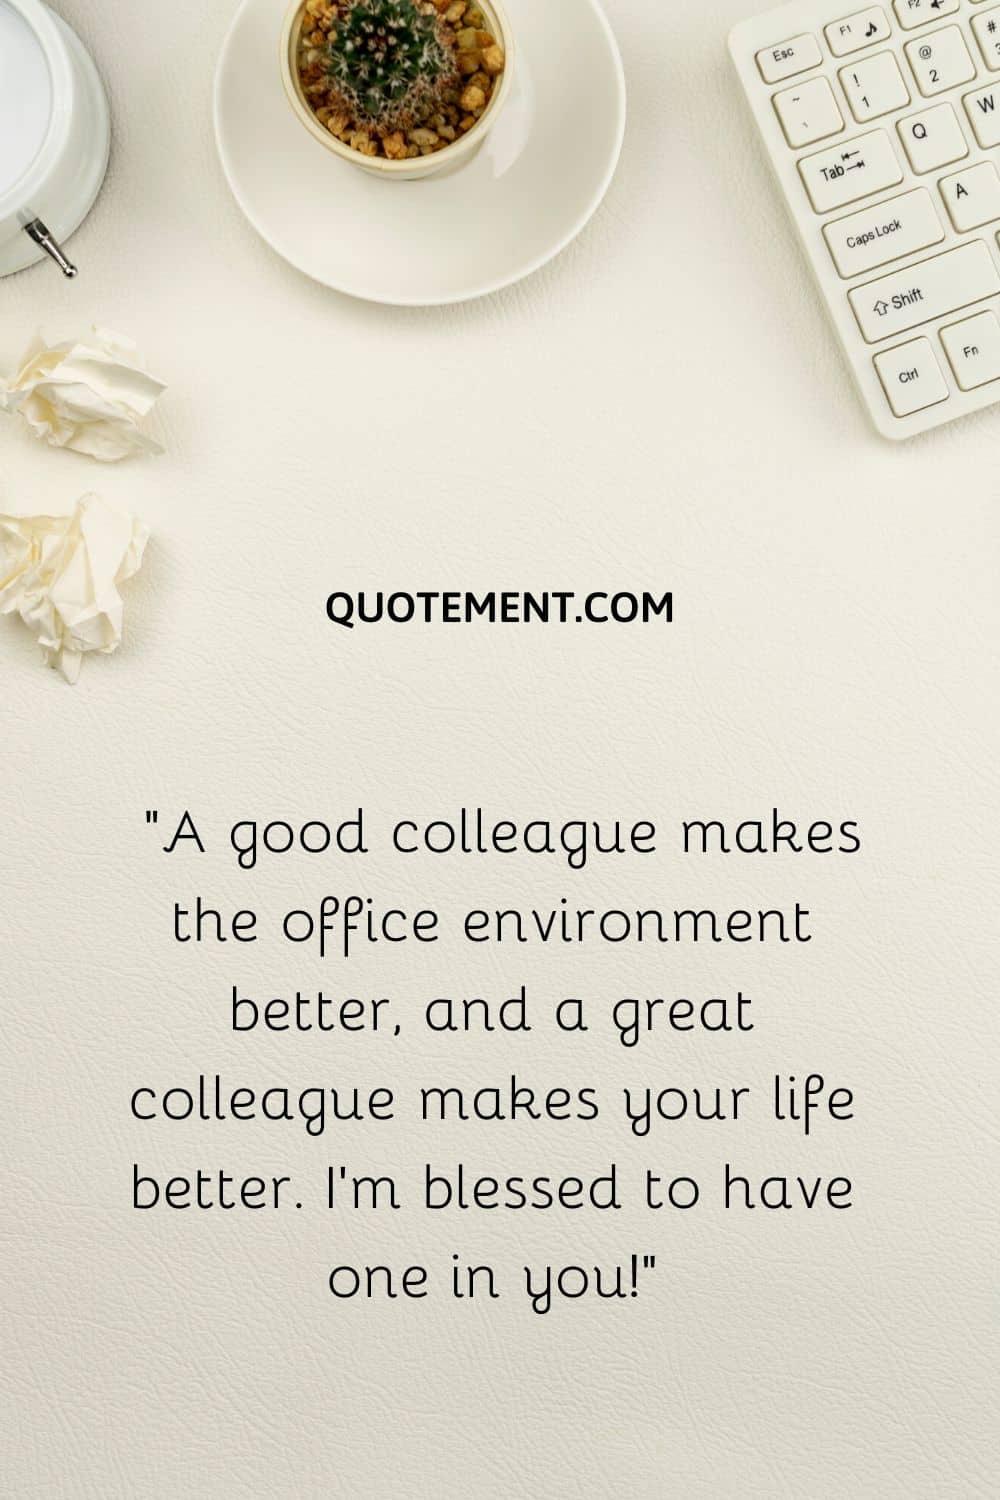 “A good colleague makes the office environment better, and a great colleague makes your life better. I’m blessed to have one in you!”